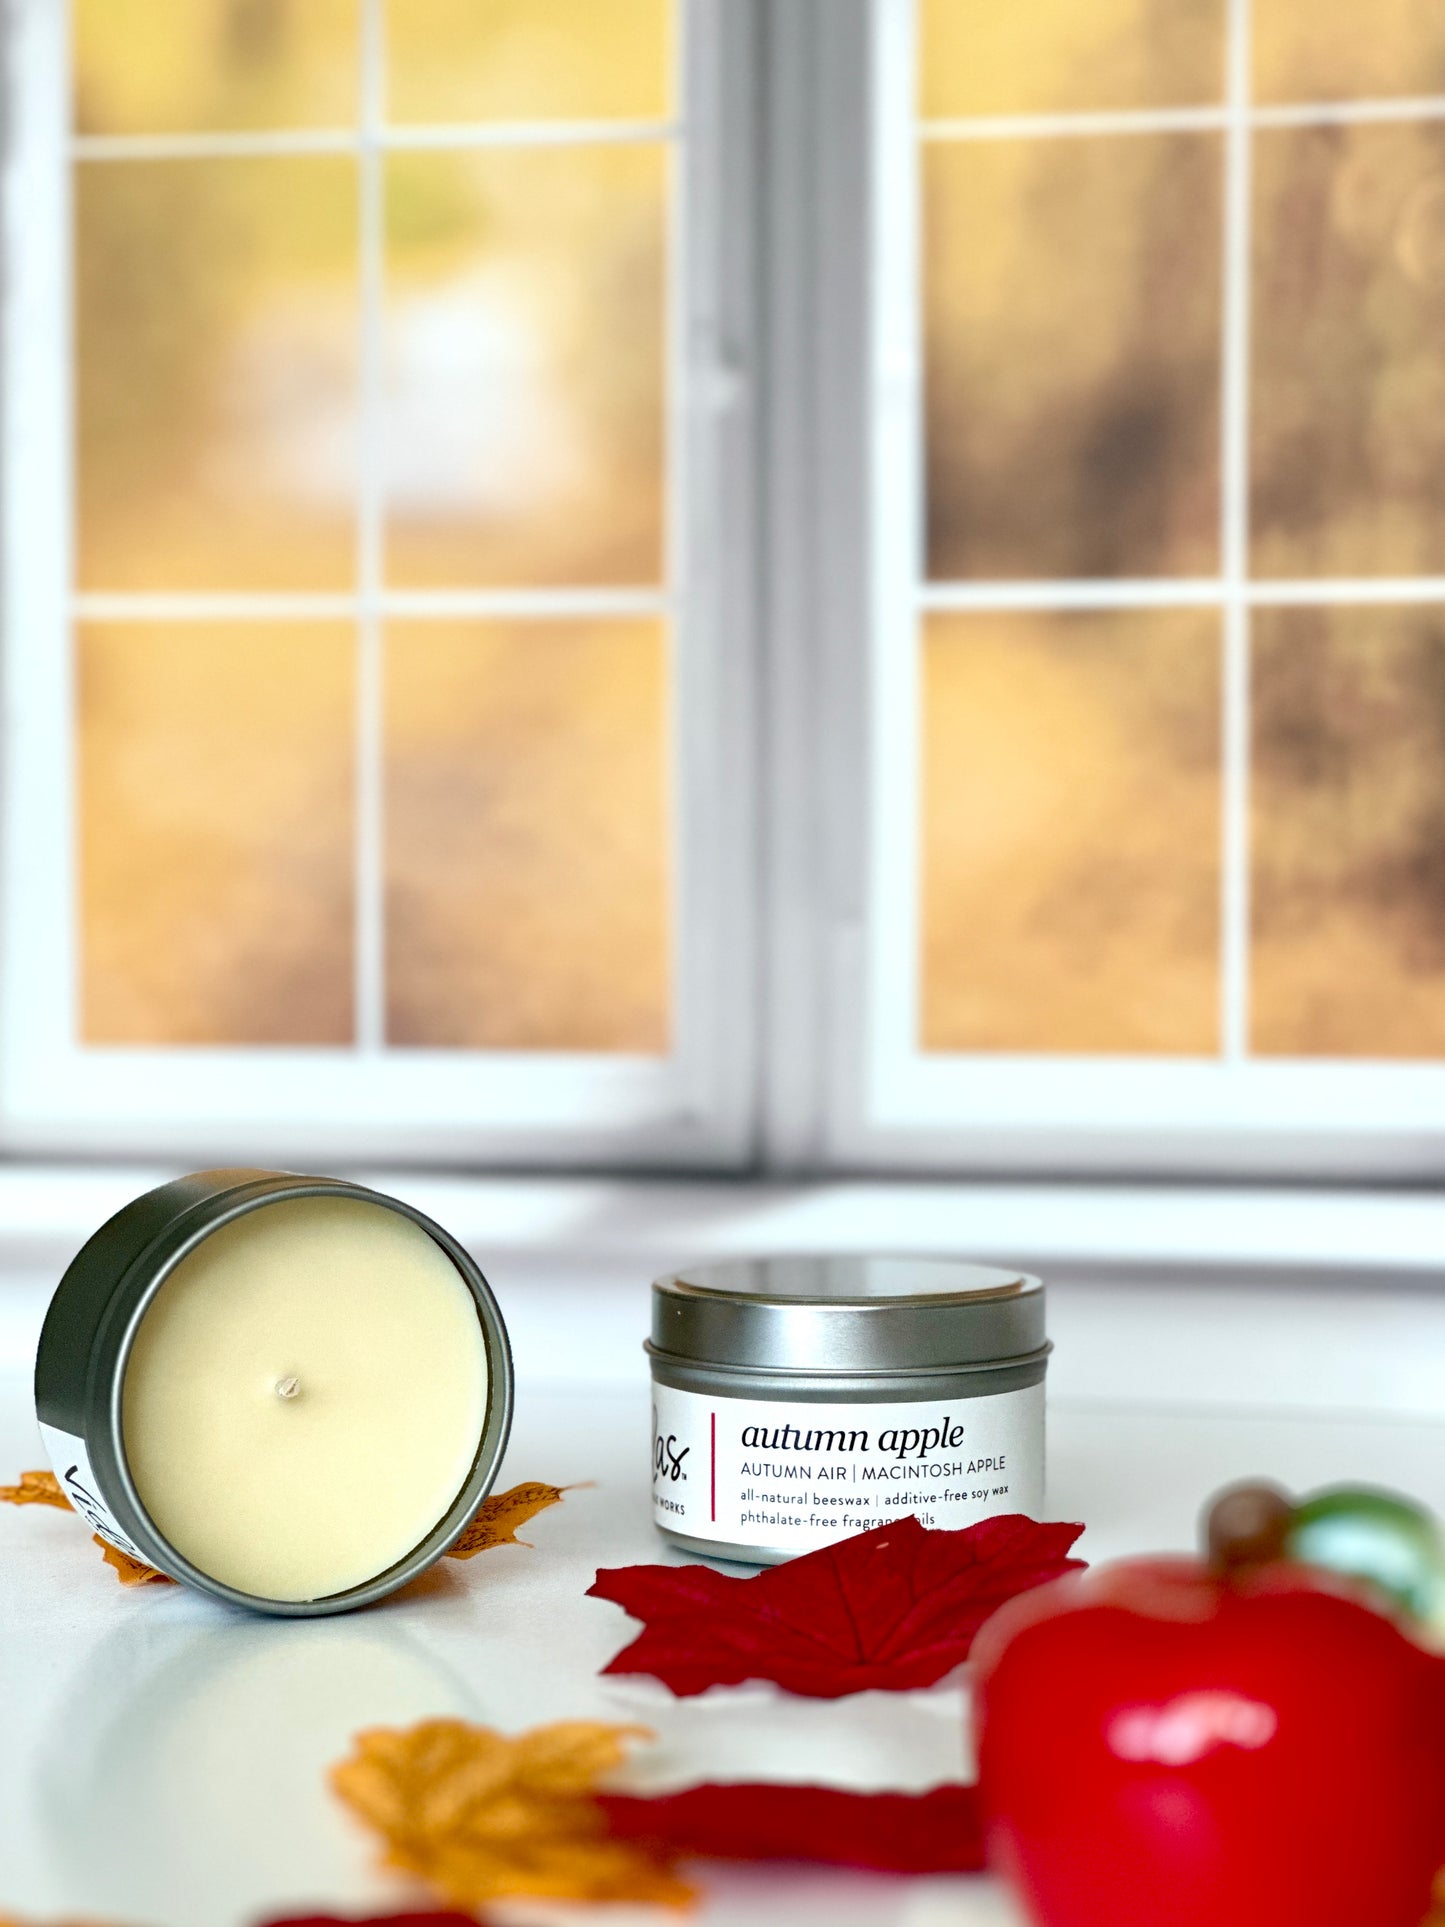 Captivating fall fragrance: Autumn air and Macintosh apple candle travel tin. A vivid red apple stands prominently in the foreground, surrounded by fall-colored leaves. Beyond, a blurred vista of yellow fall foliage outside a window sets the scene, capturing the essence of the season.